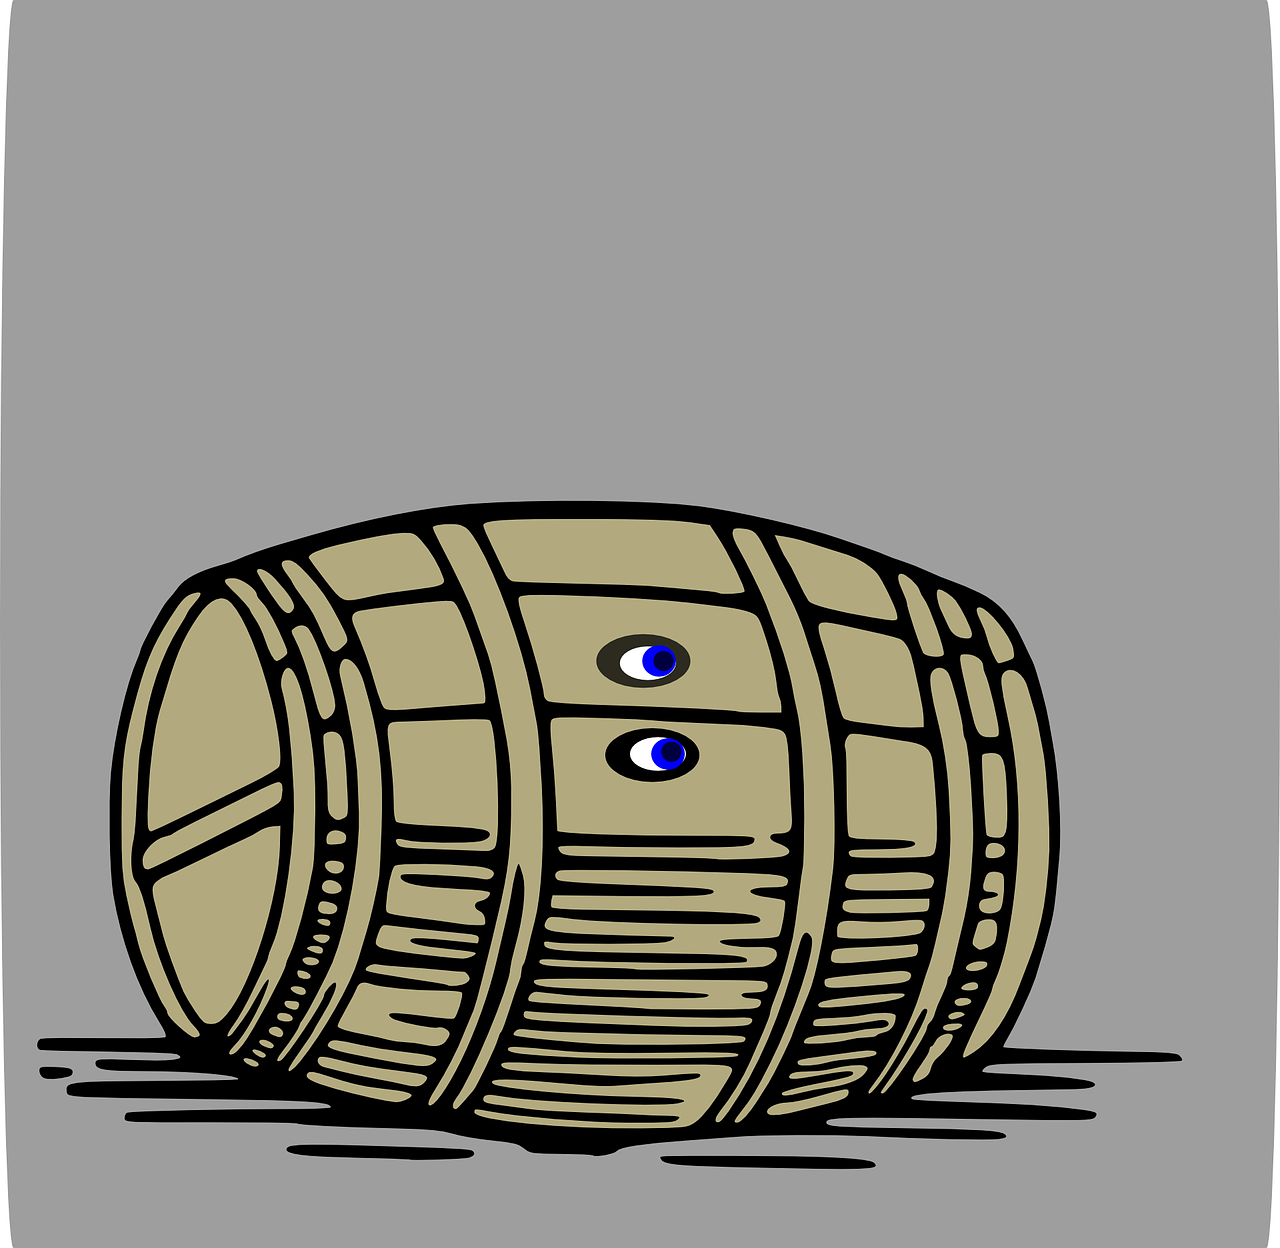 a wooden barrel with a blue eye on it, a digital rendering, deviantart, conceptual art, colored woodcut, movie scene, snapchat photo, very humorous illustration